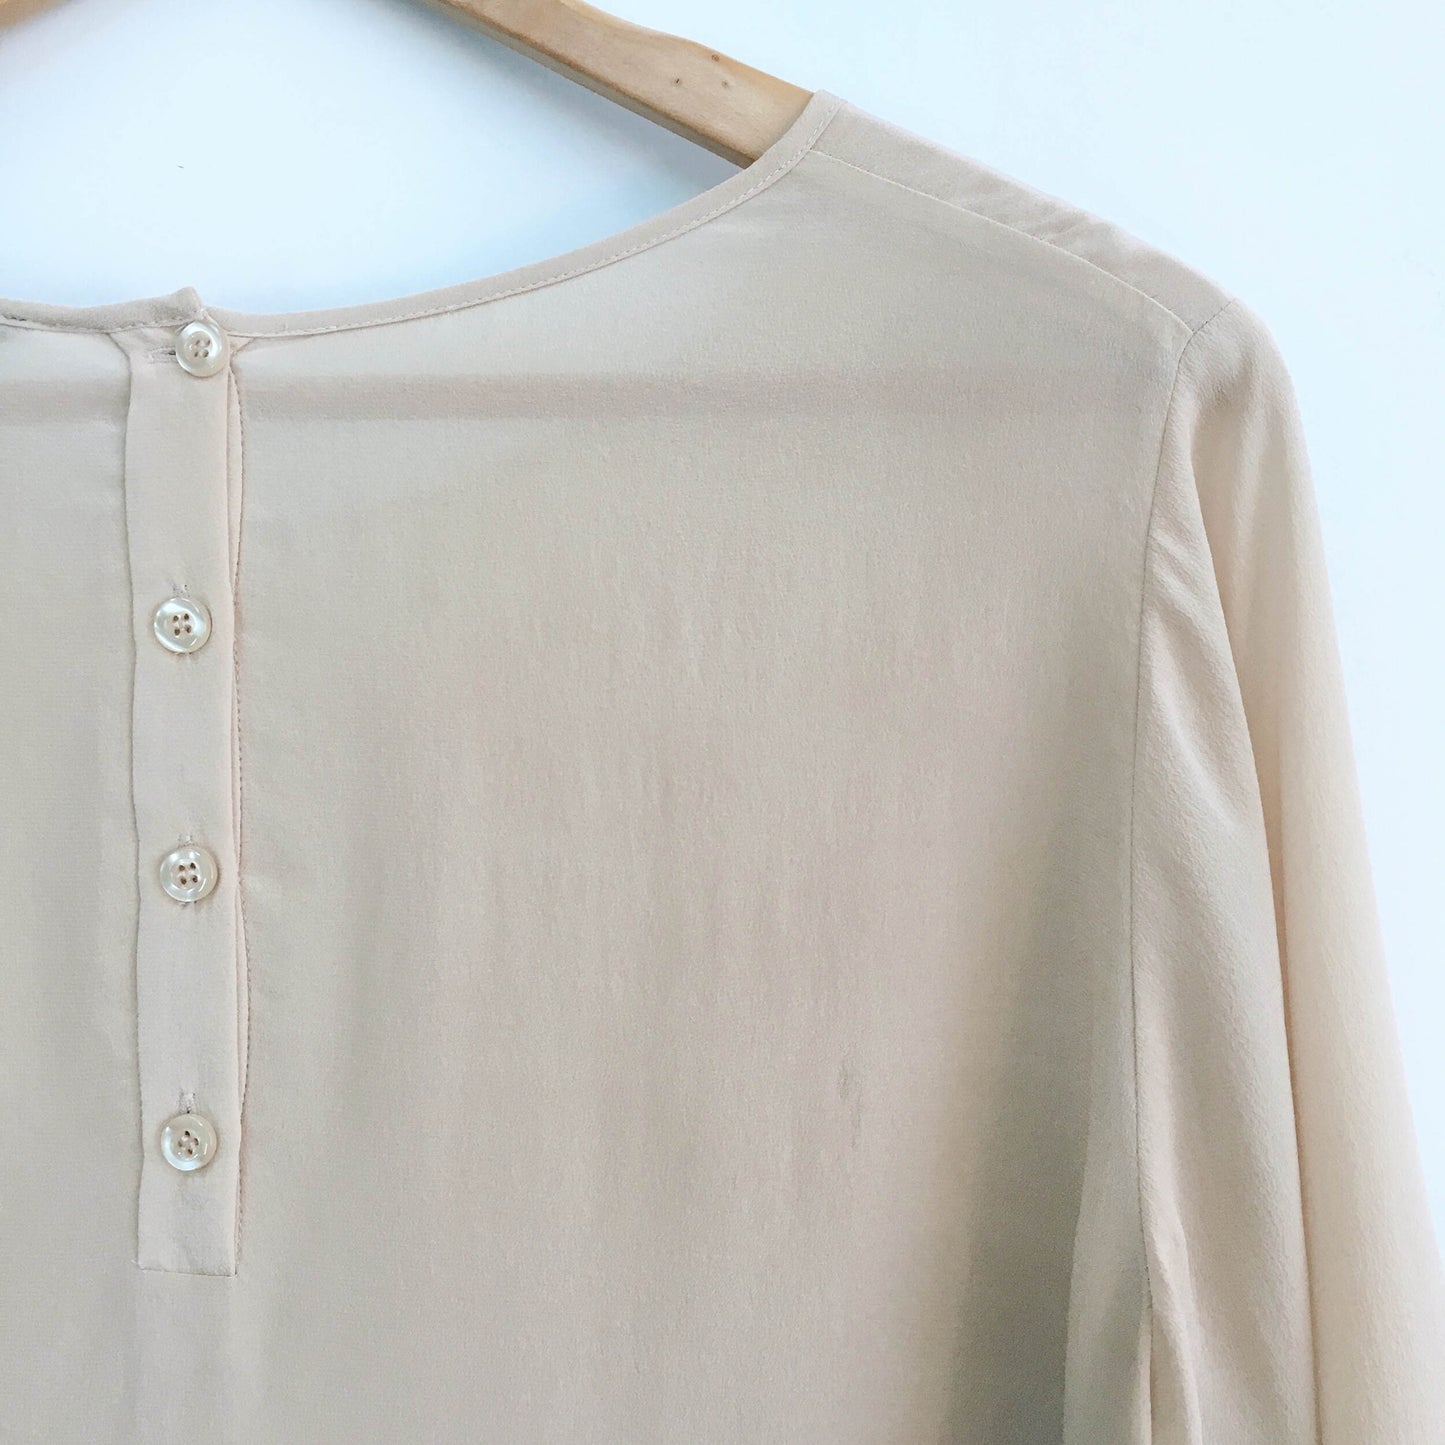 French Connection Nude Silk Blouse - size 8